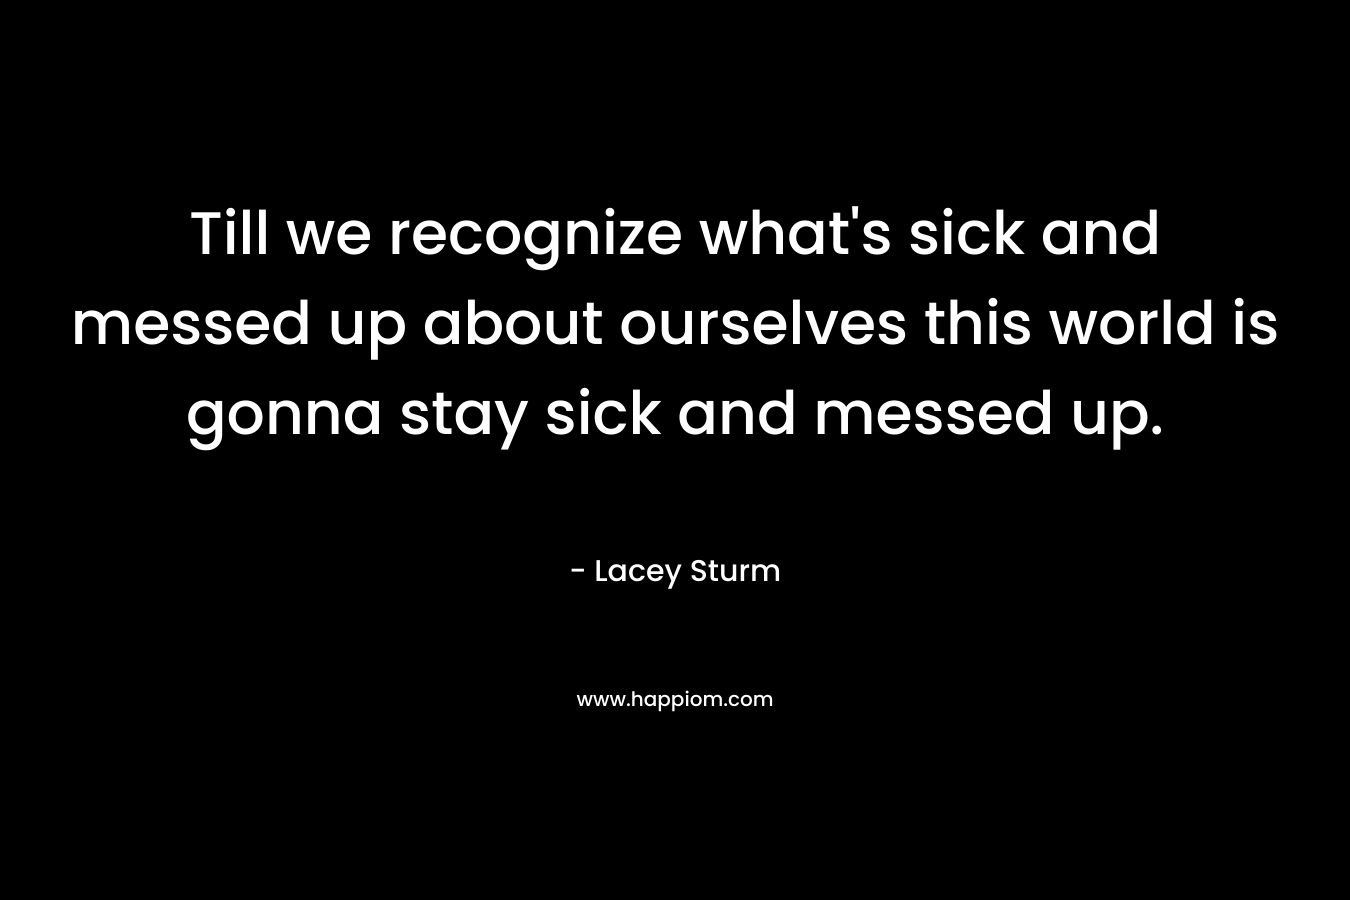 Till we recognize what's sick and messed up about ourselves this world is gonna stay sick and messed up.